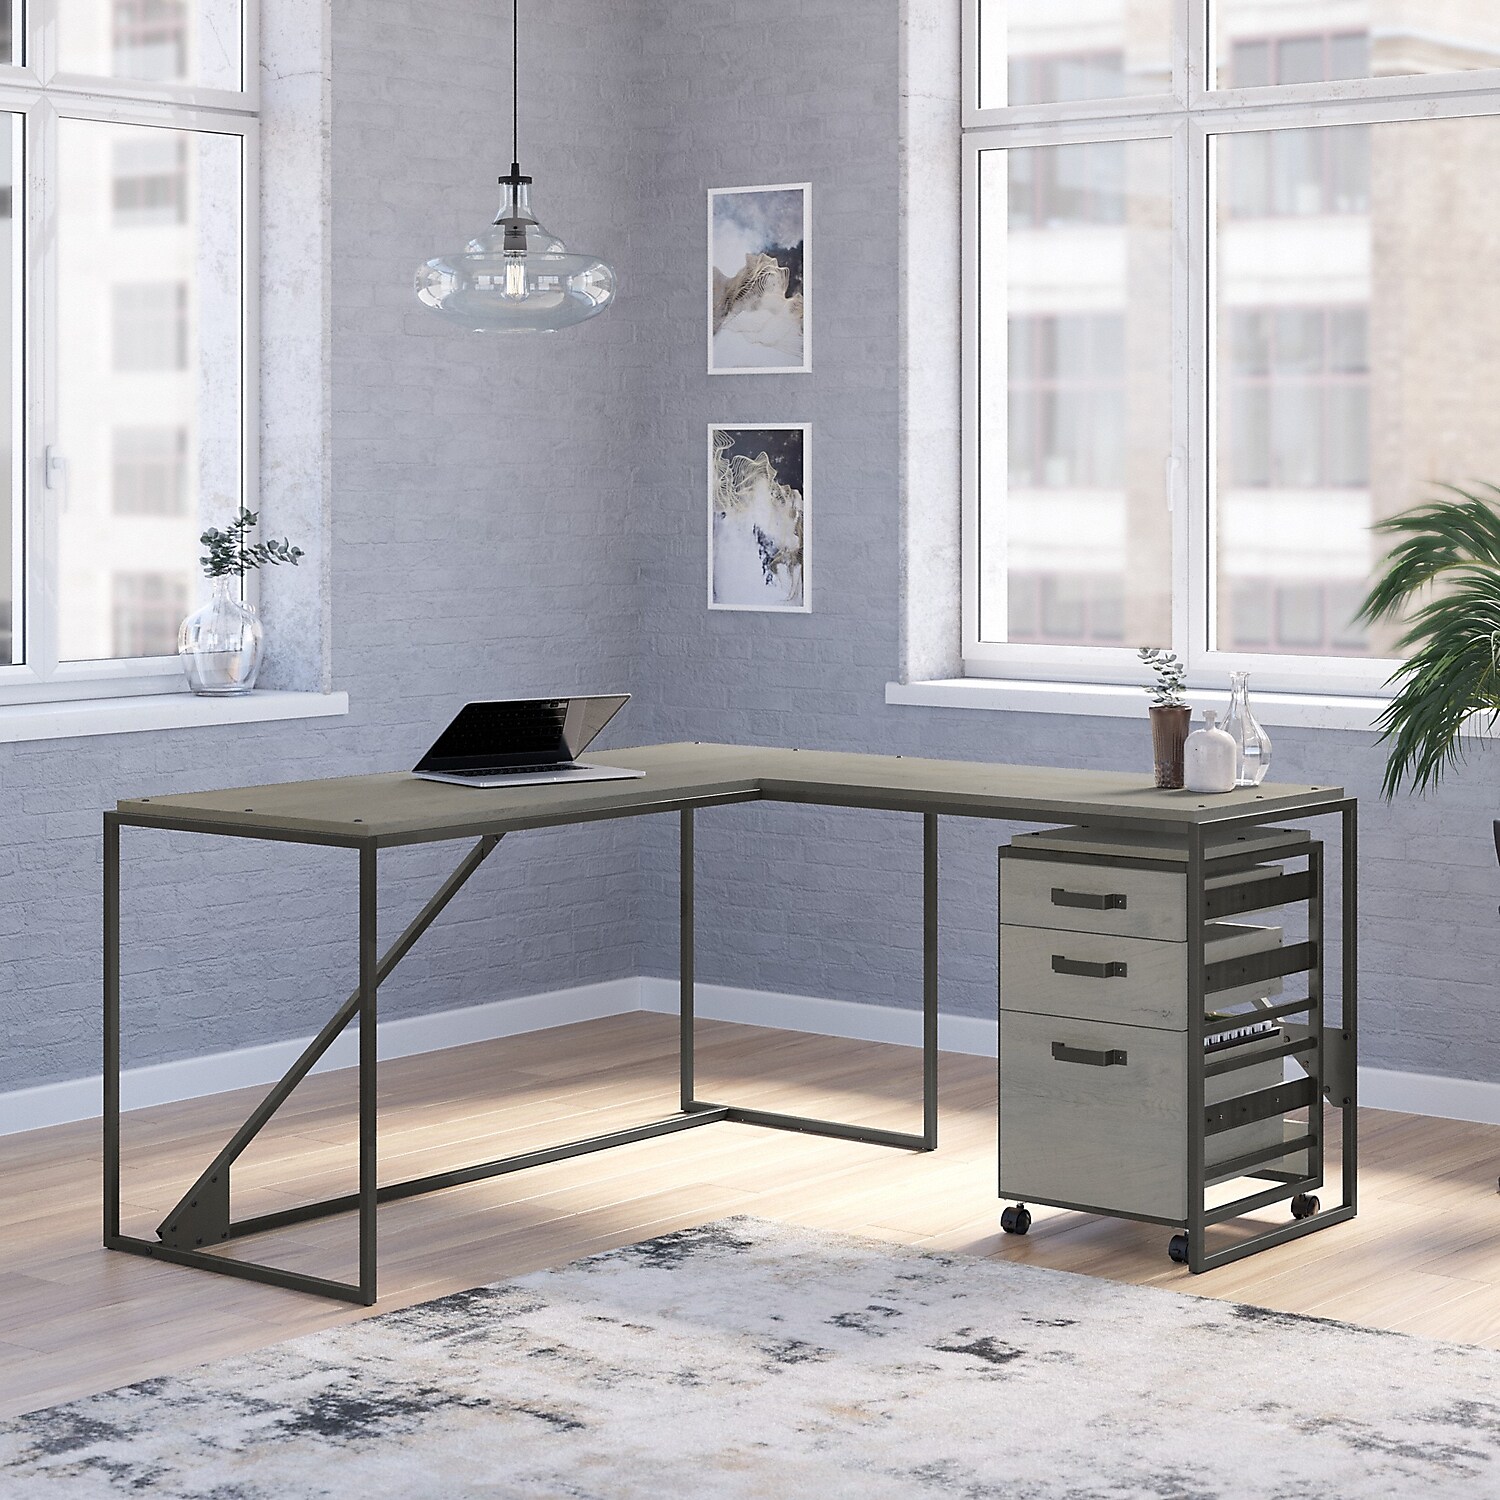 Bush Furniture Refinery 50"W L-Shaped Industrial Desk With File Cabinets, Dark Gray Hickory, Standard Delivery - image 2 of 8